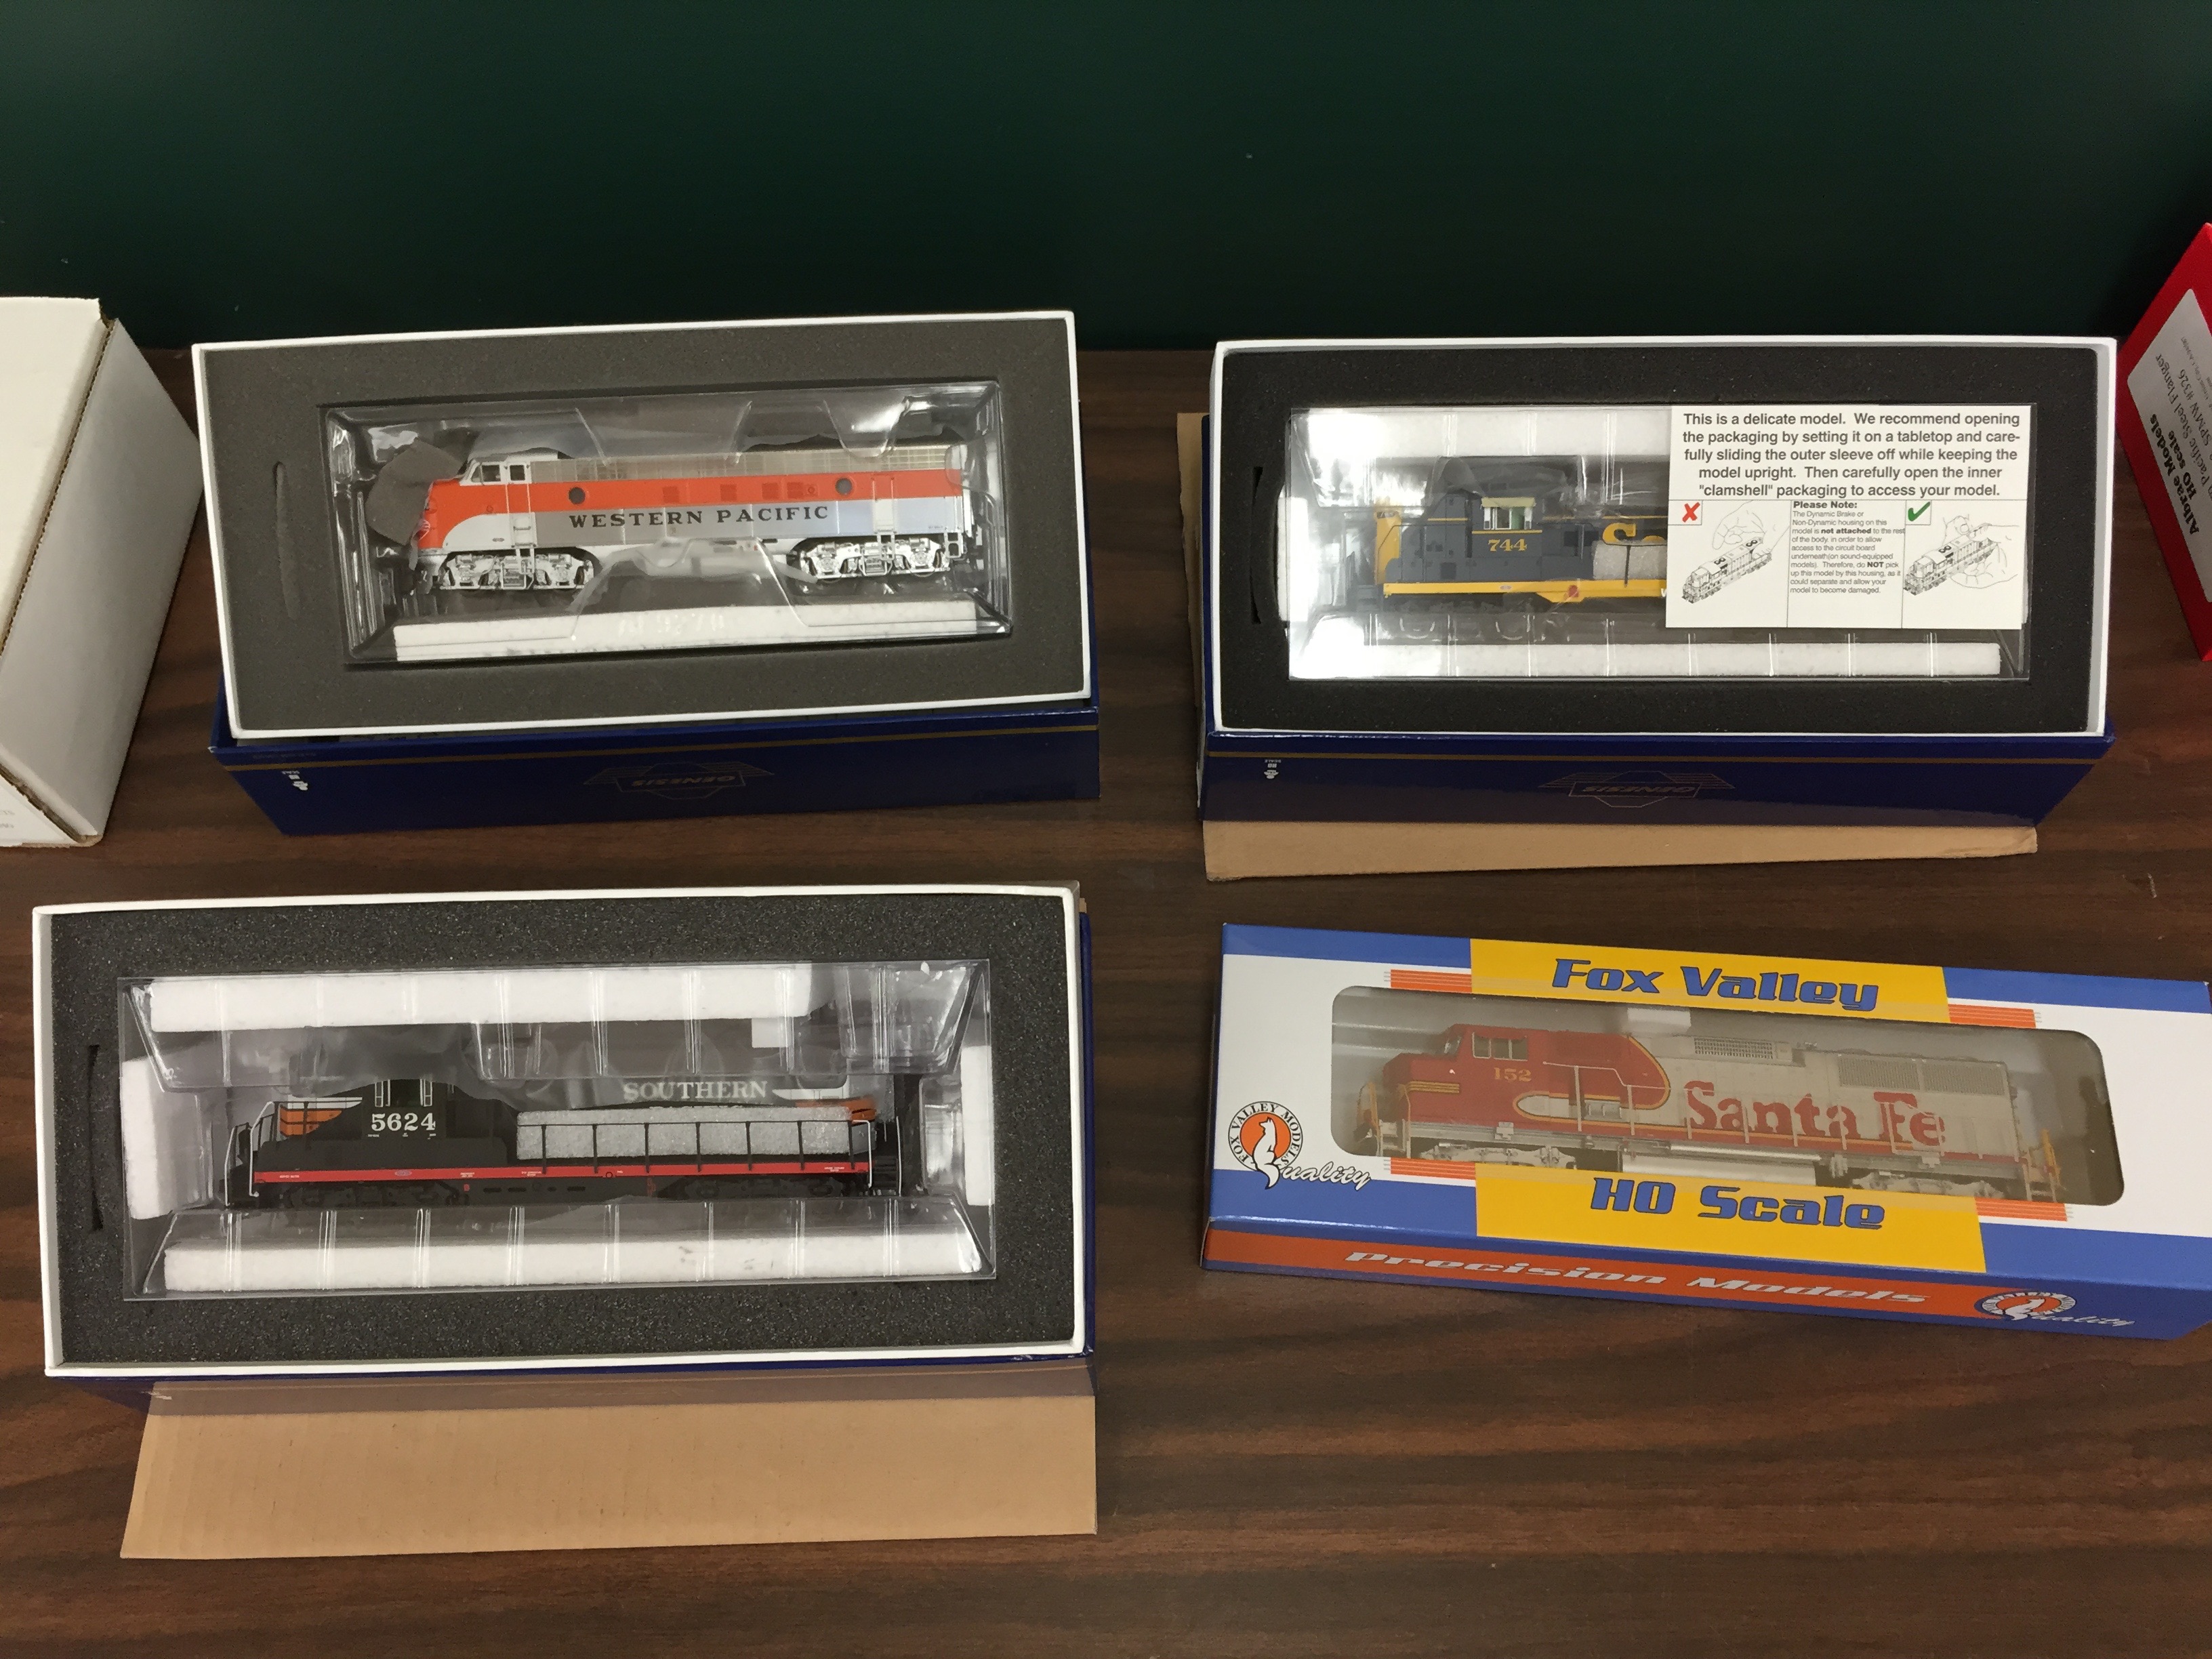 Our Thanks to Athearn & Fox Valley Models for their generous prize donations